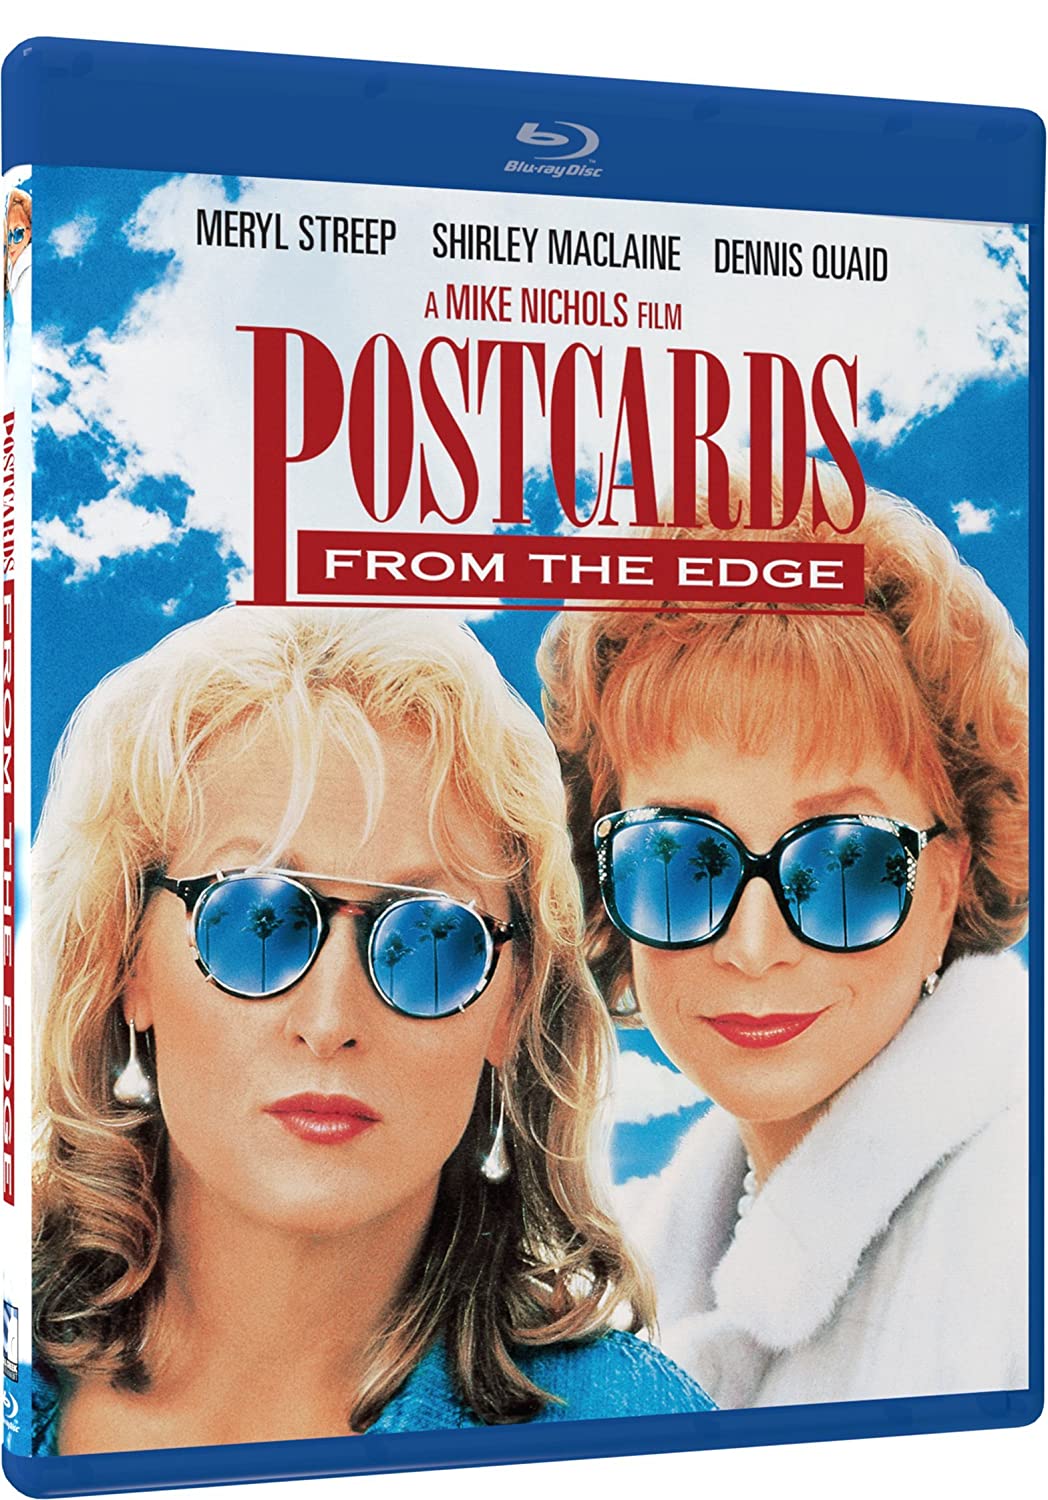 Postcards From The Edge - Blu-ray [ 2018 ]  - Comedy Movies On Blu-ray - Movies On GRUV